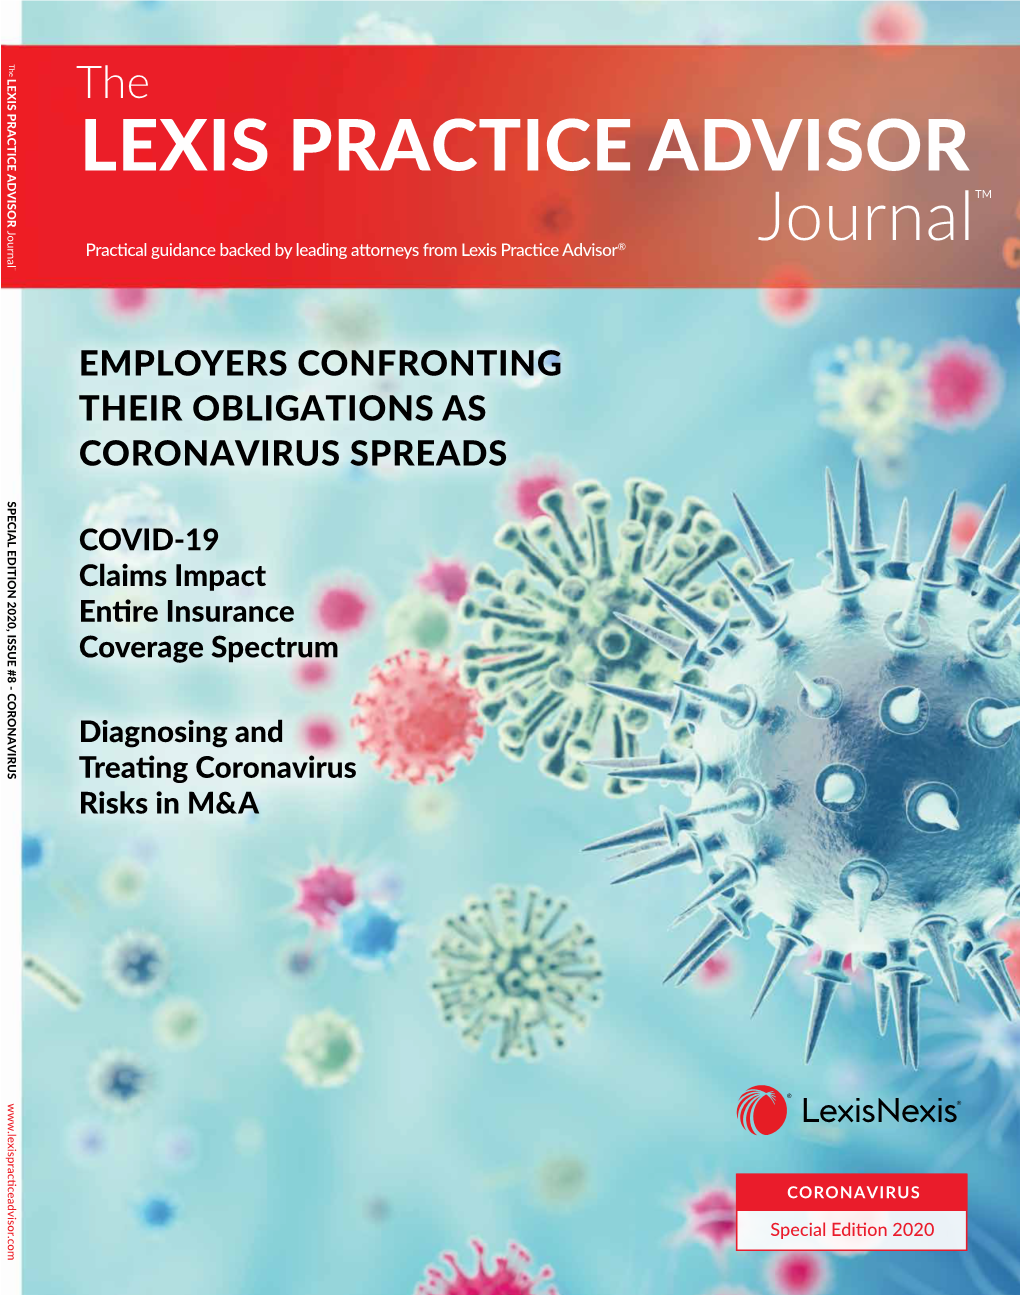 Employers Confront Their Obligations As Coronavirus (COVID-19) Spreads